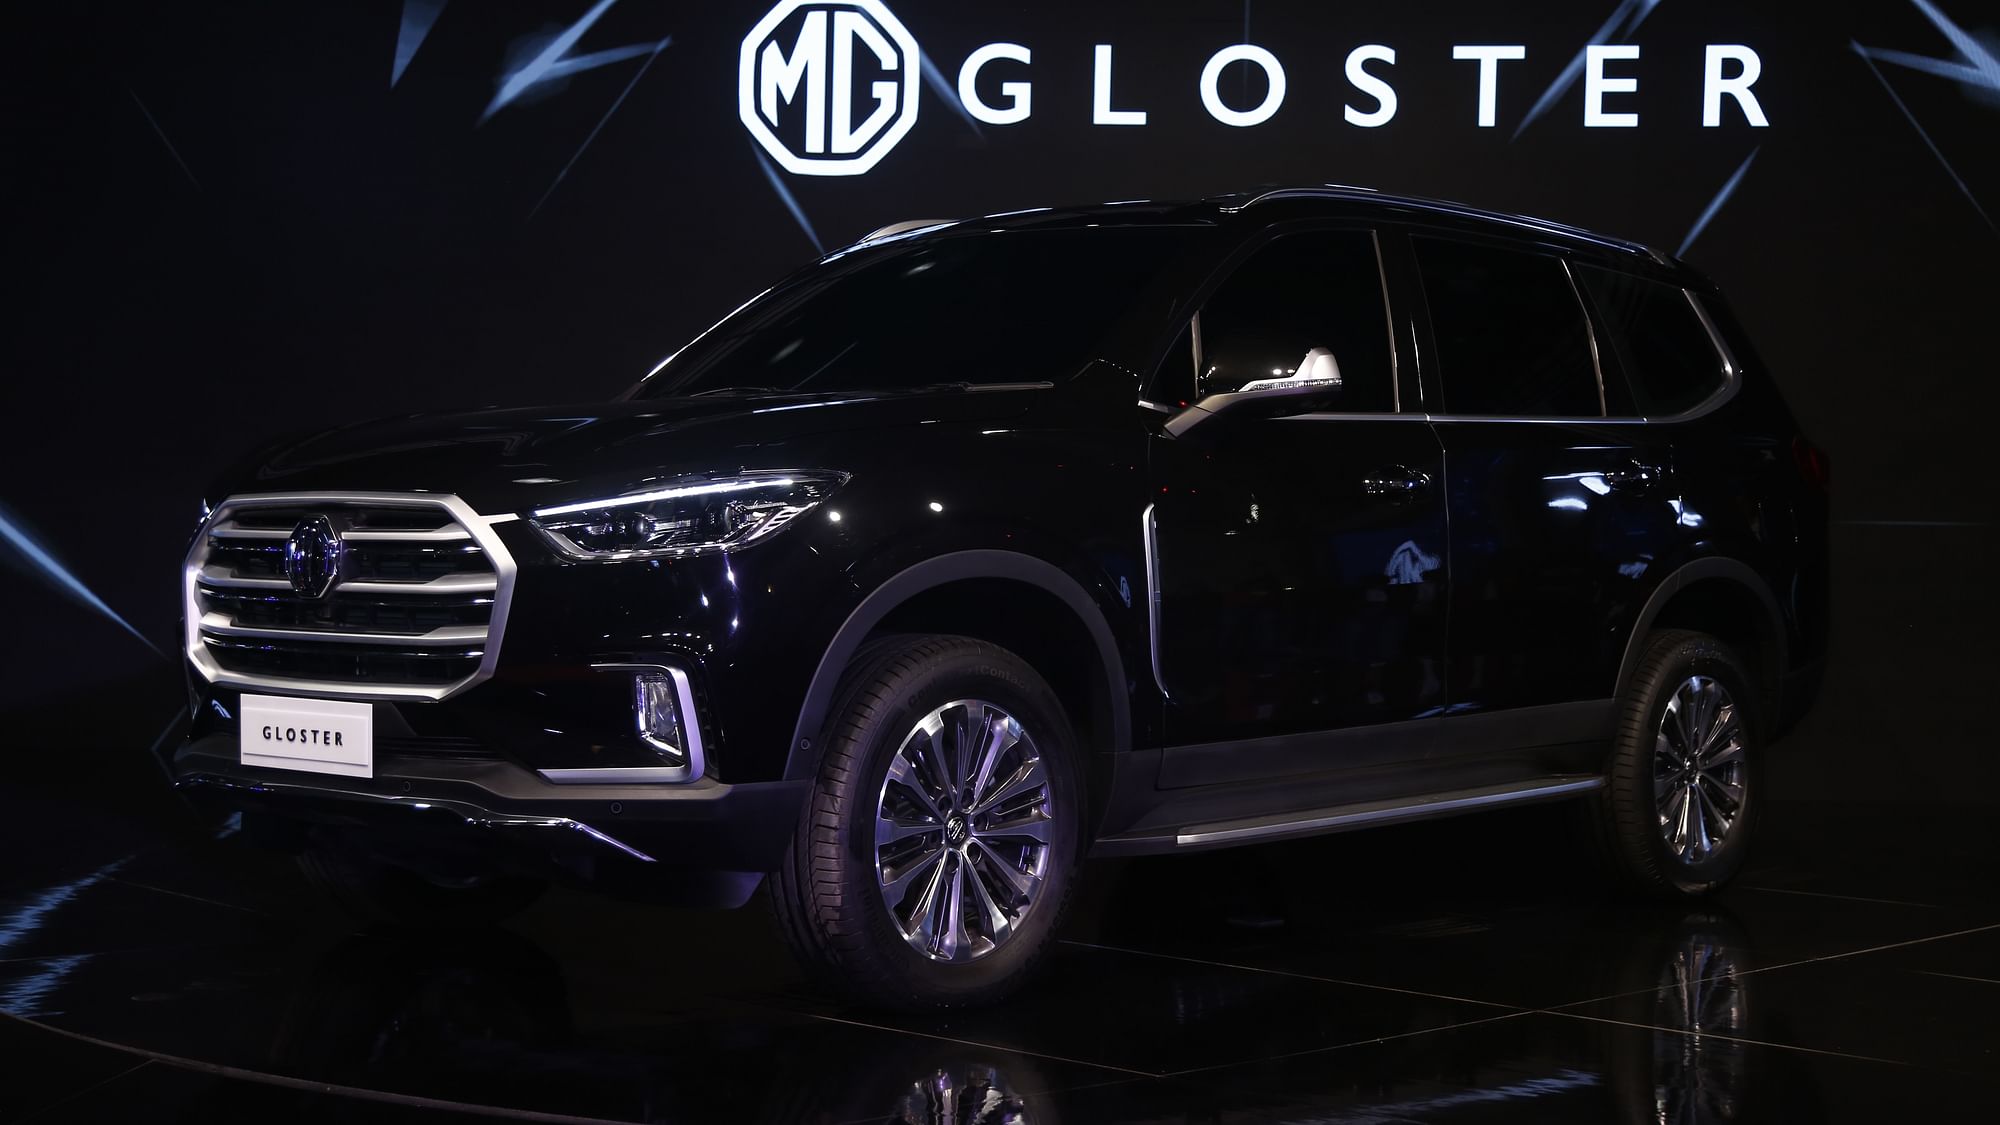 The MG Gloster will compete in the full-size SUV segment.